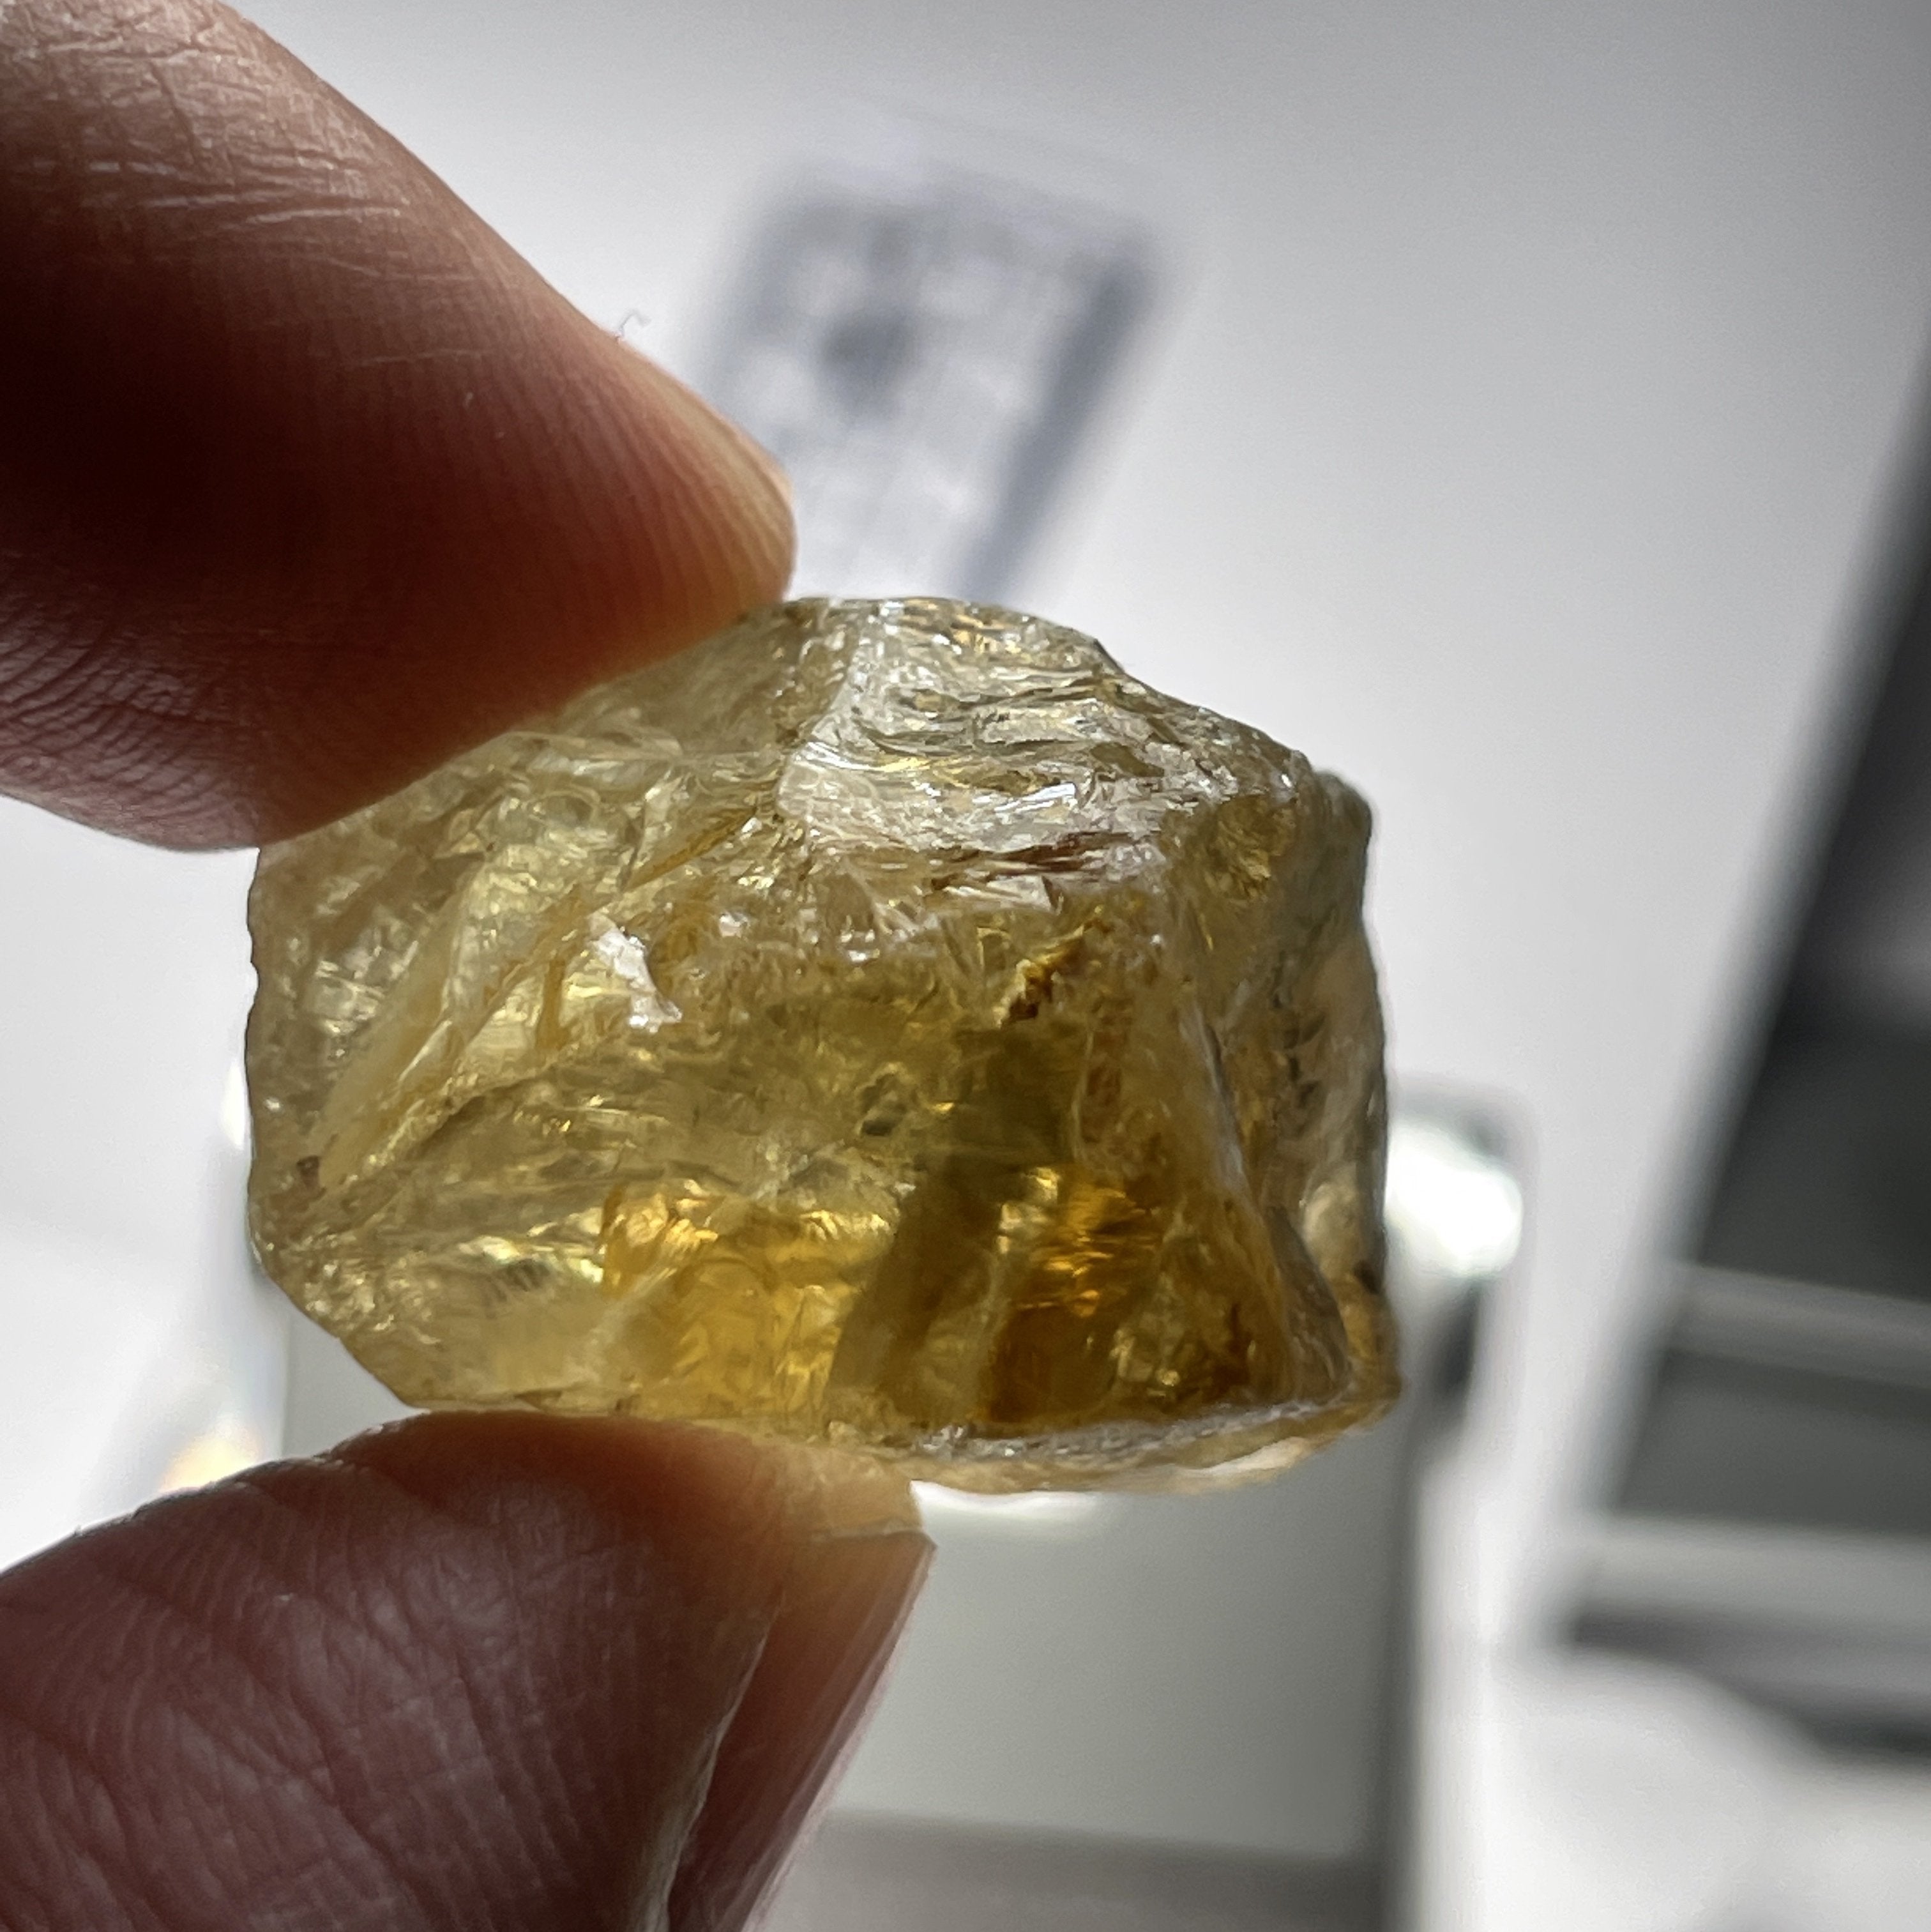 14.89Gm Citrine Zambia. Untreated Unheated. Rare As Not Heated From Amethyst Natural Colour.